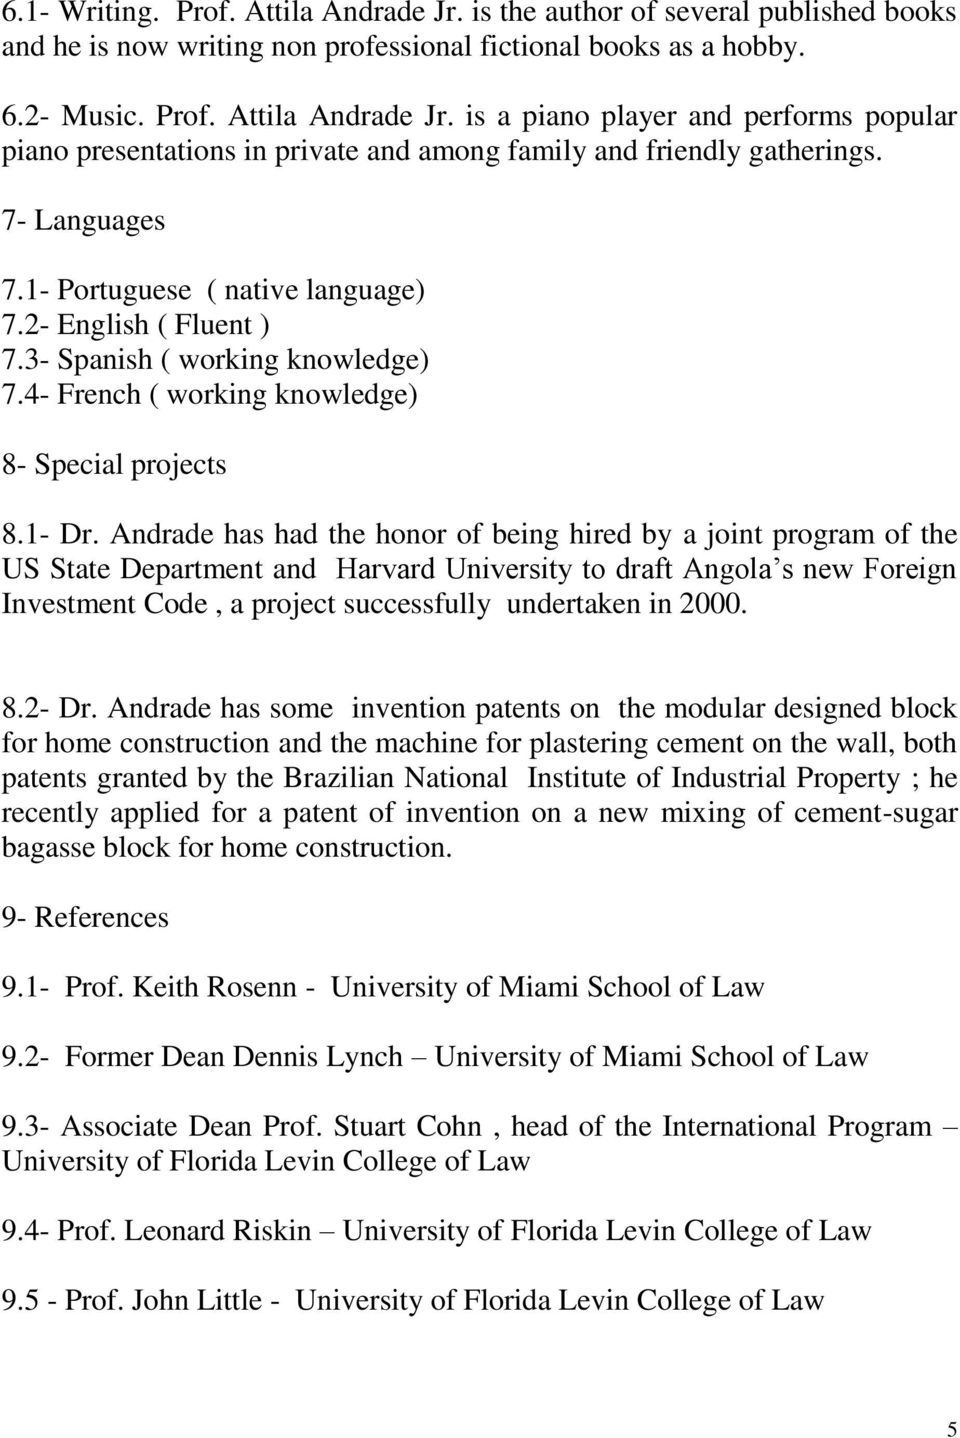 Andrade has had the honor of being hired by a joint program of the US State Department and Harvard University to draft Angola s new Foreign Investment Code, a project successfully undertaken in 2000.